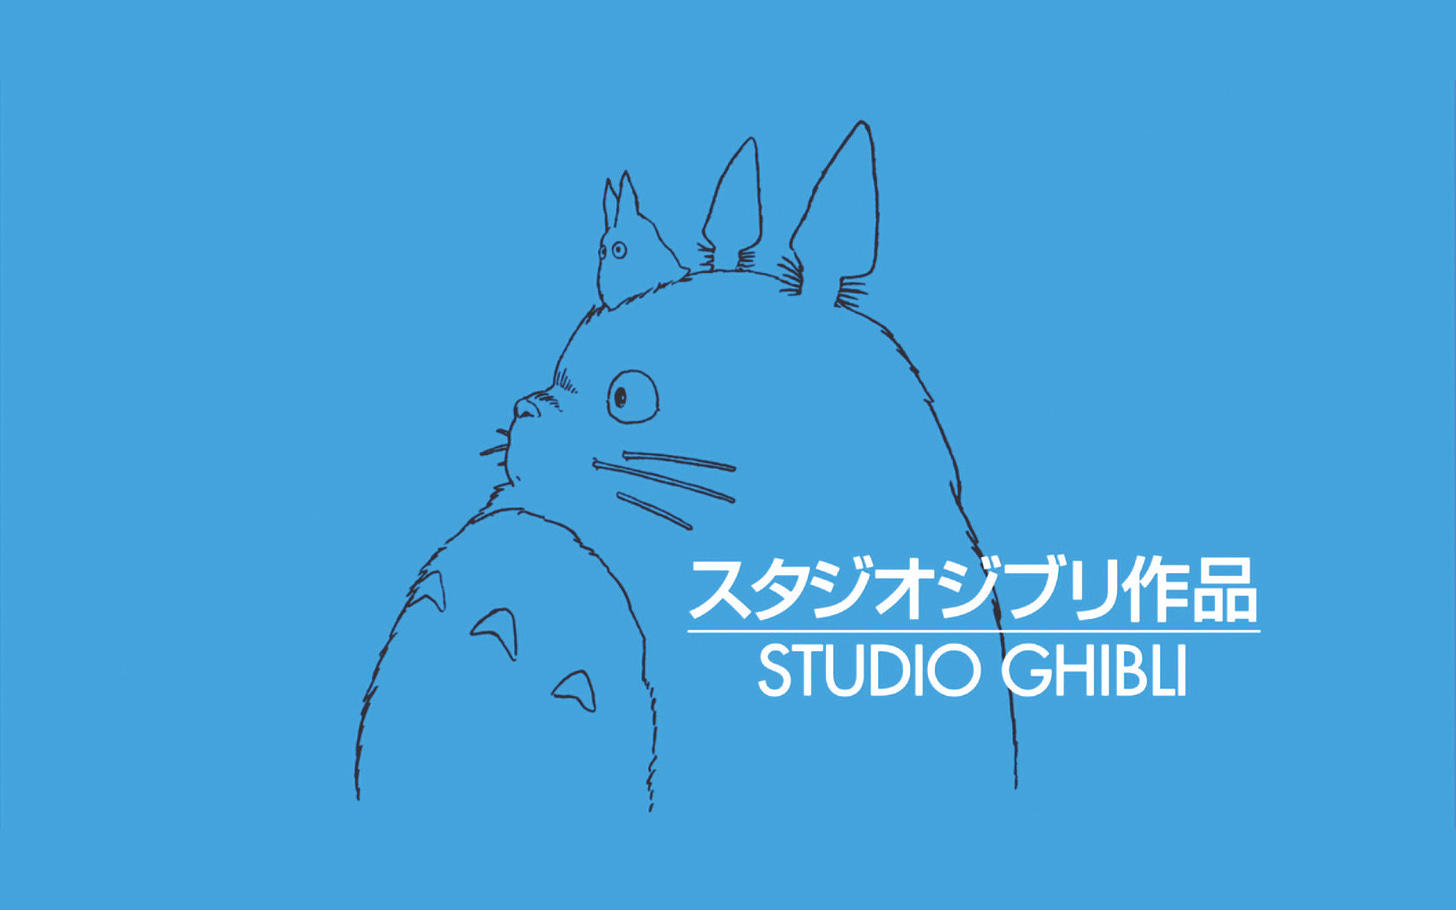 Studio Ghibili's tital screen image of Totoro on a blue background with the name 'Studio Ghibli' in both Japanese and English